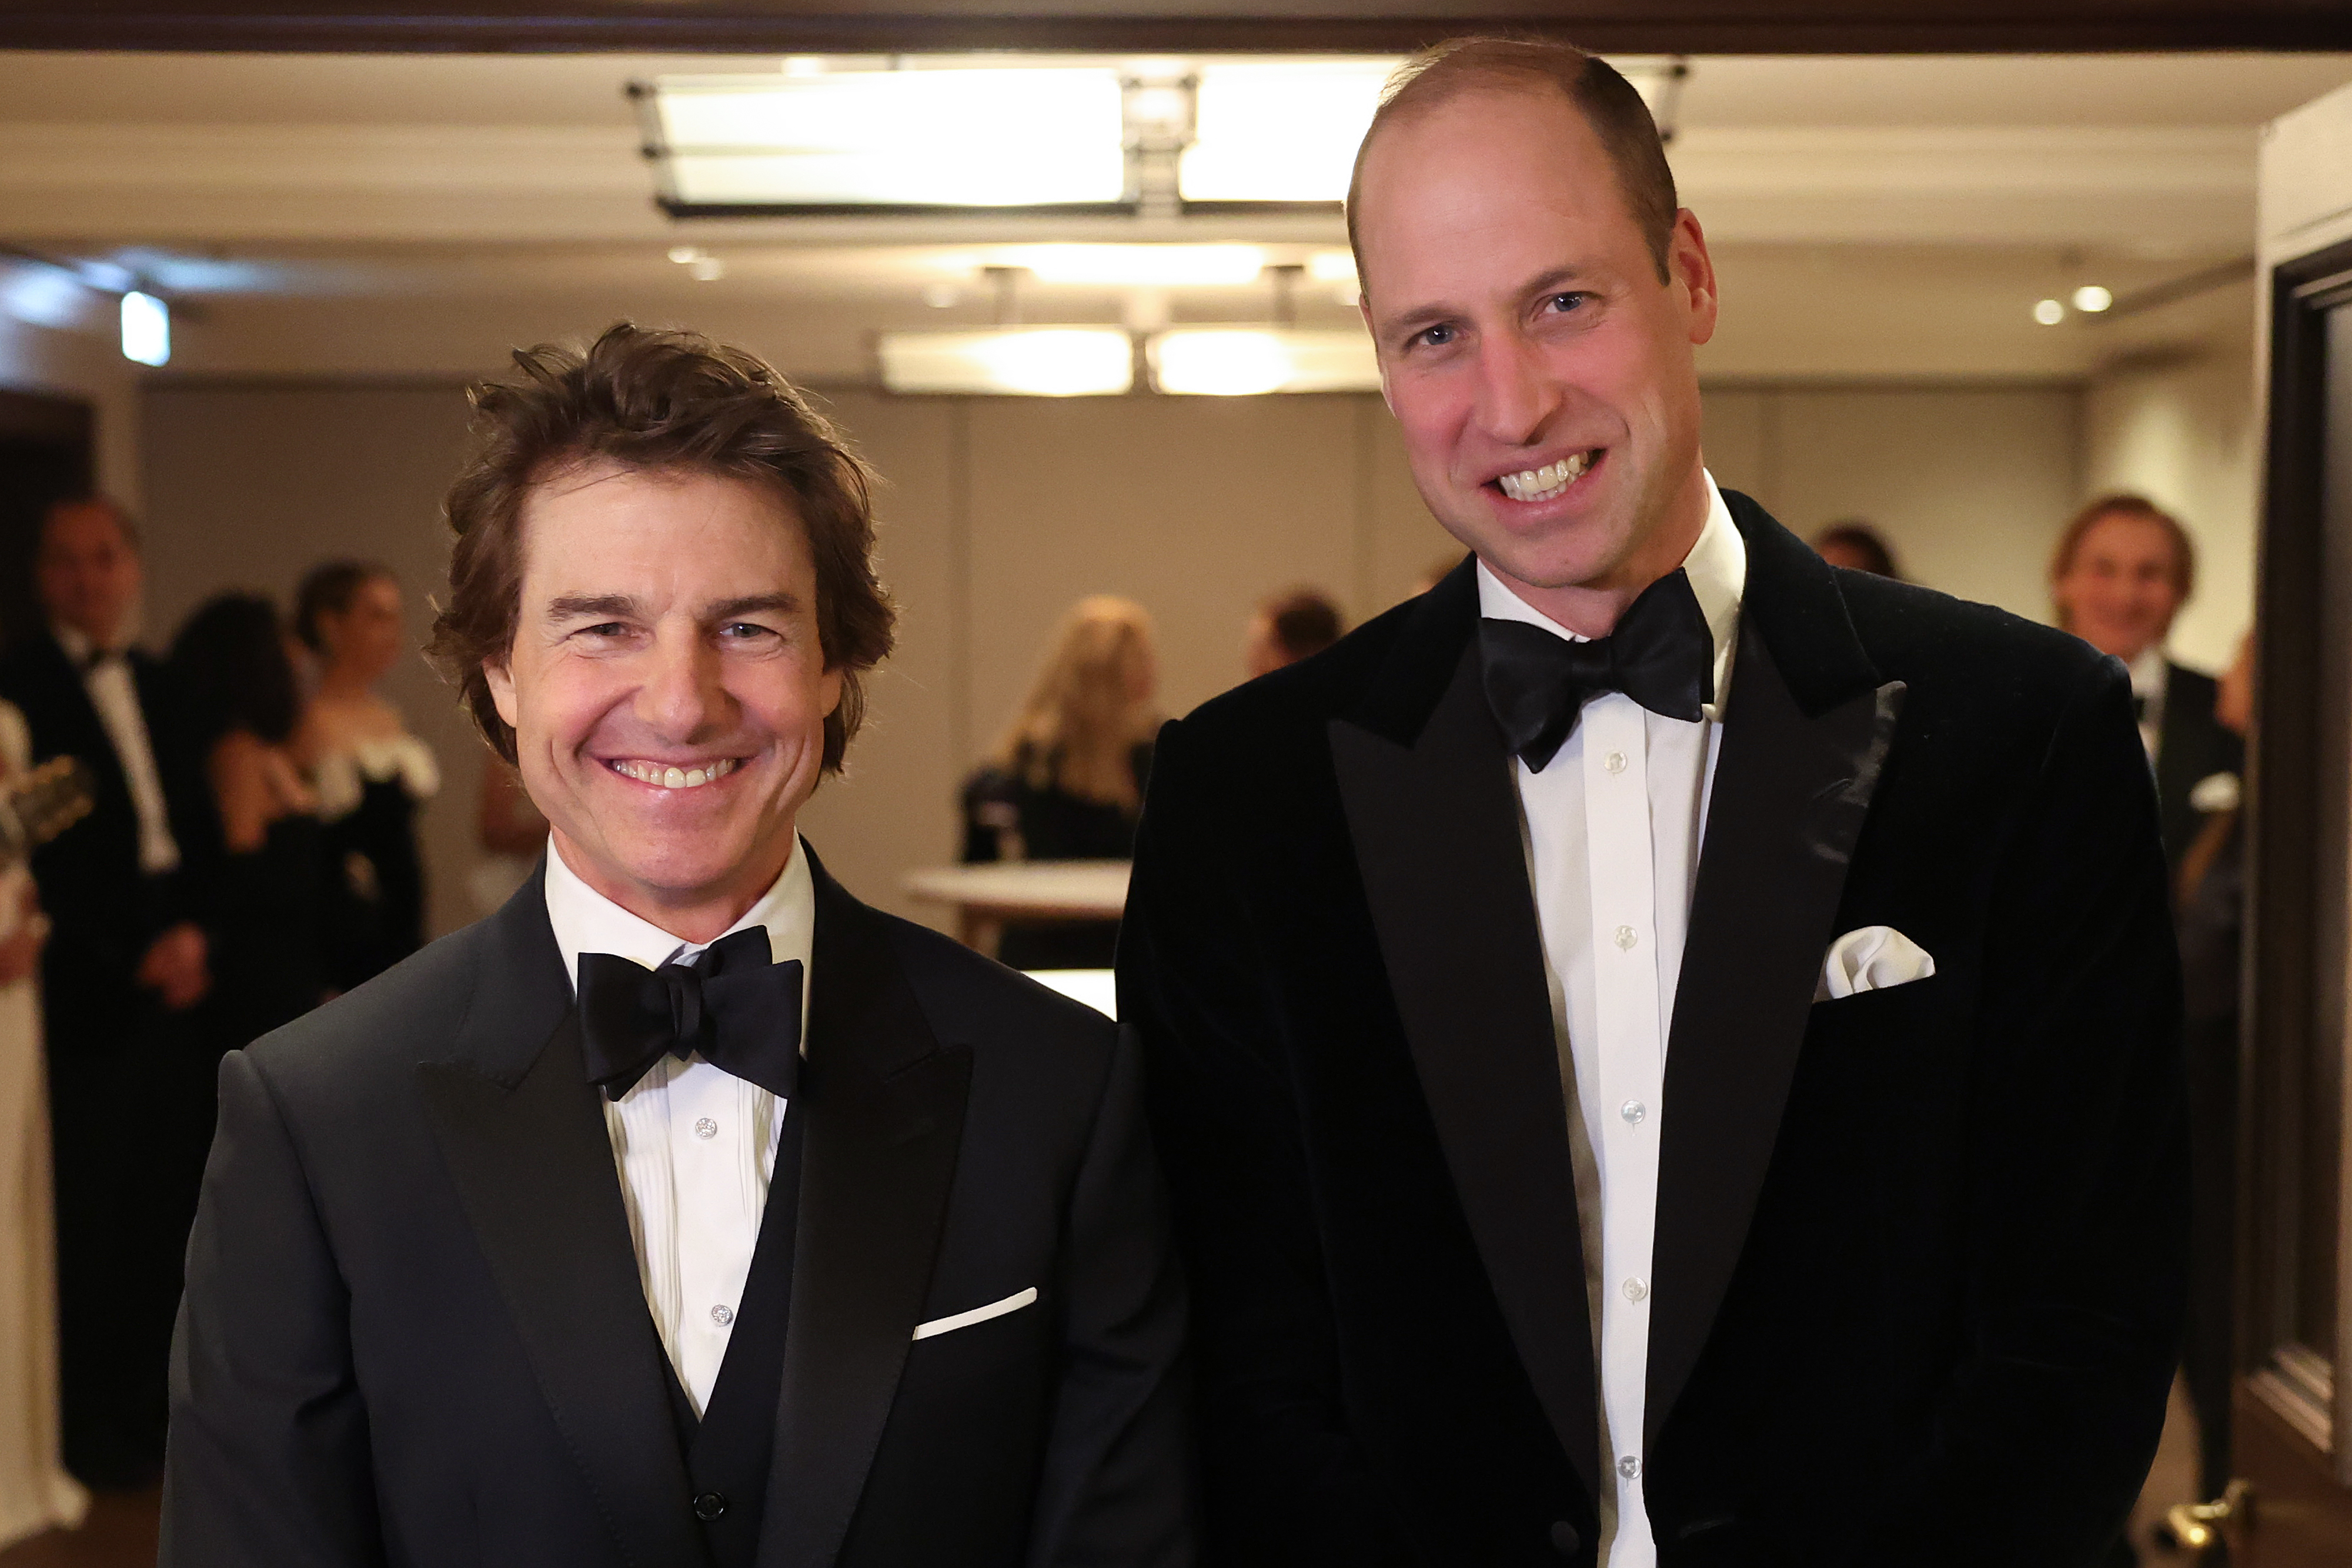 Two men in black-tie attire smiling at an event